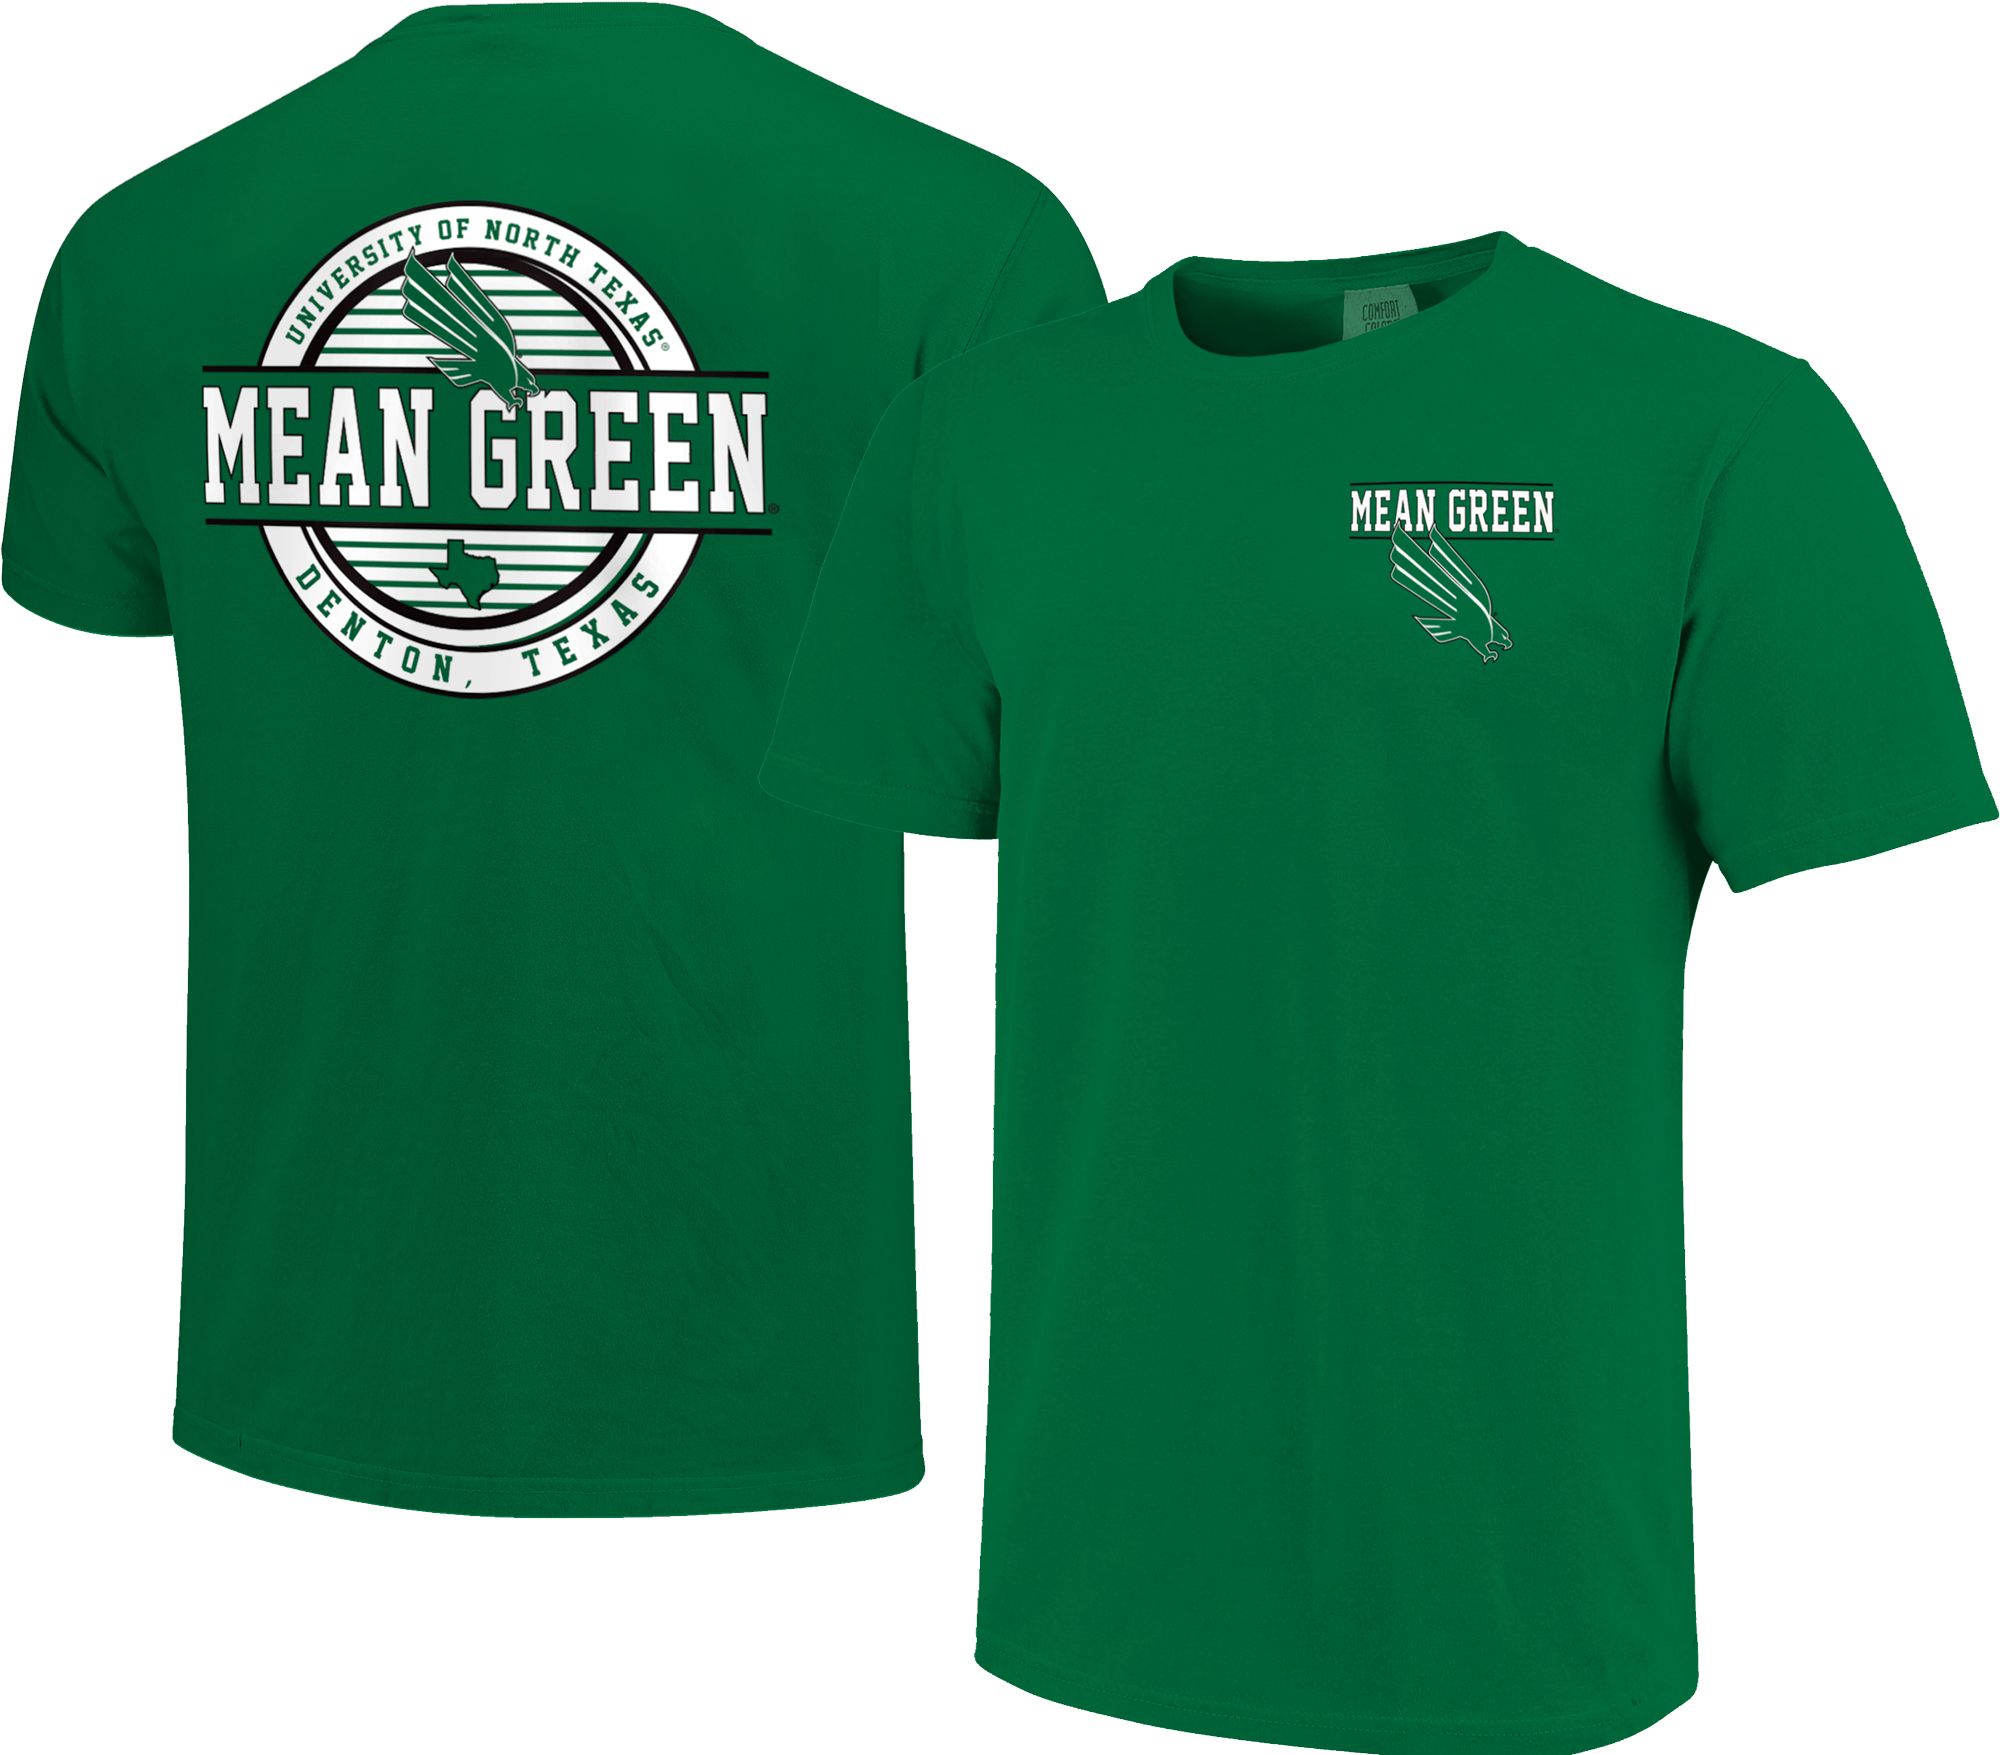 Mean Green track and field gear